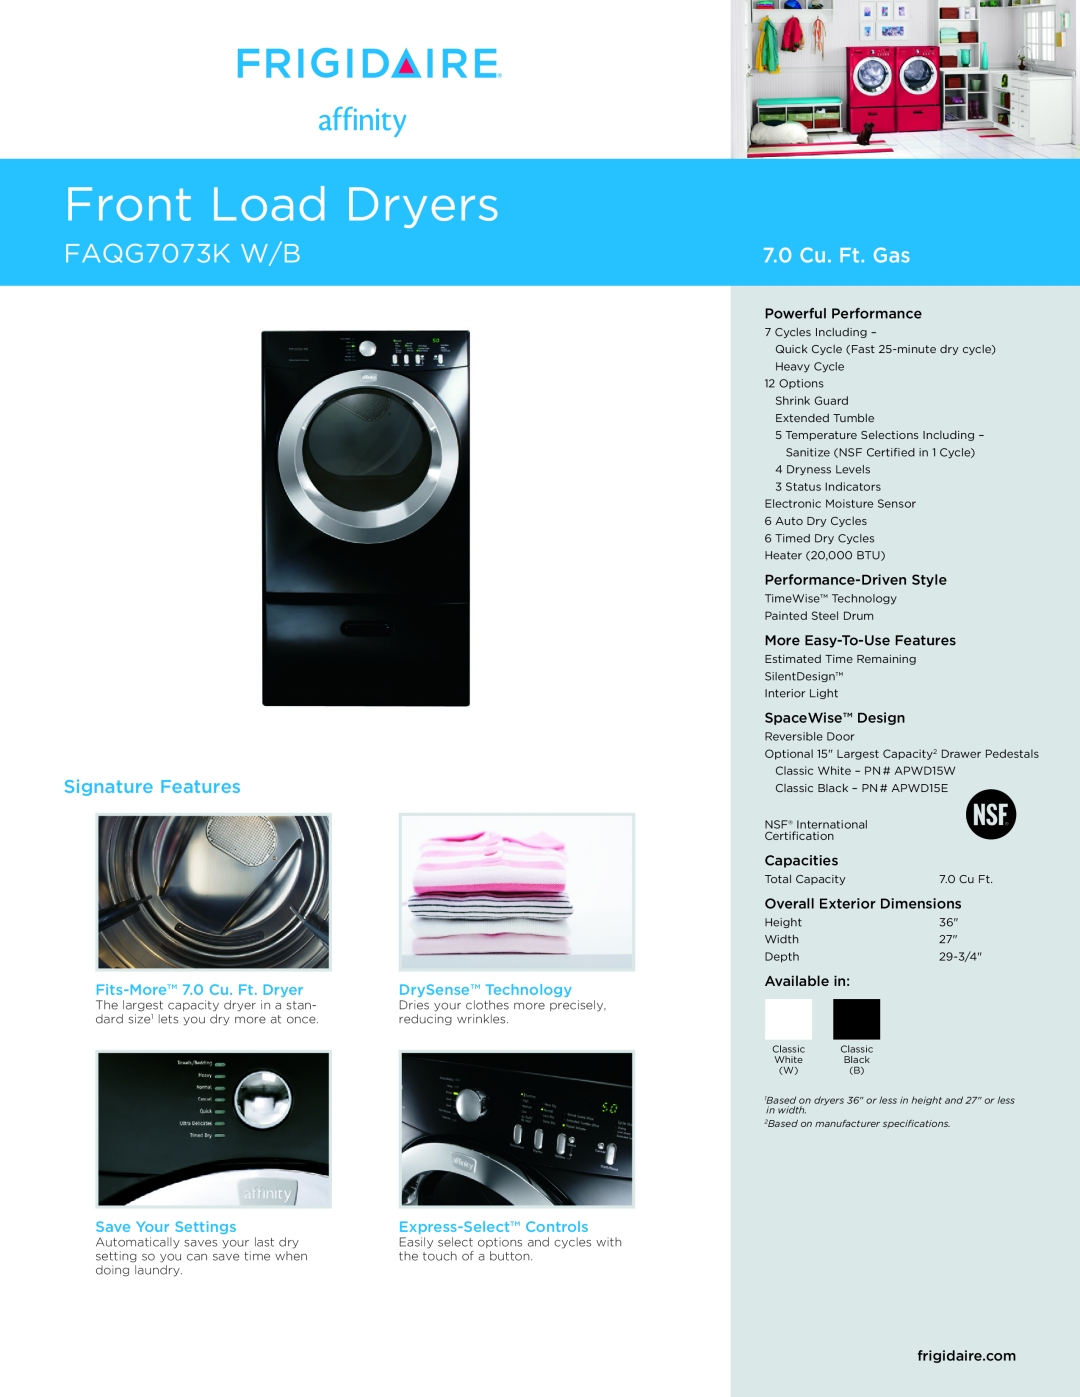 Frigidaire FAQG7073K W/B dimensions Fits-More 7.0 Cu. Ft. Dryer, DrySense Technology, Save Your Settings, SpaceWise Design 